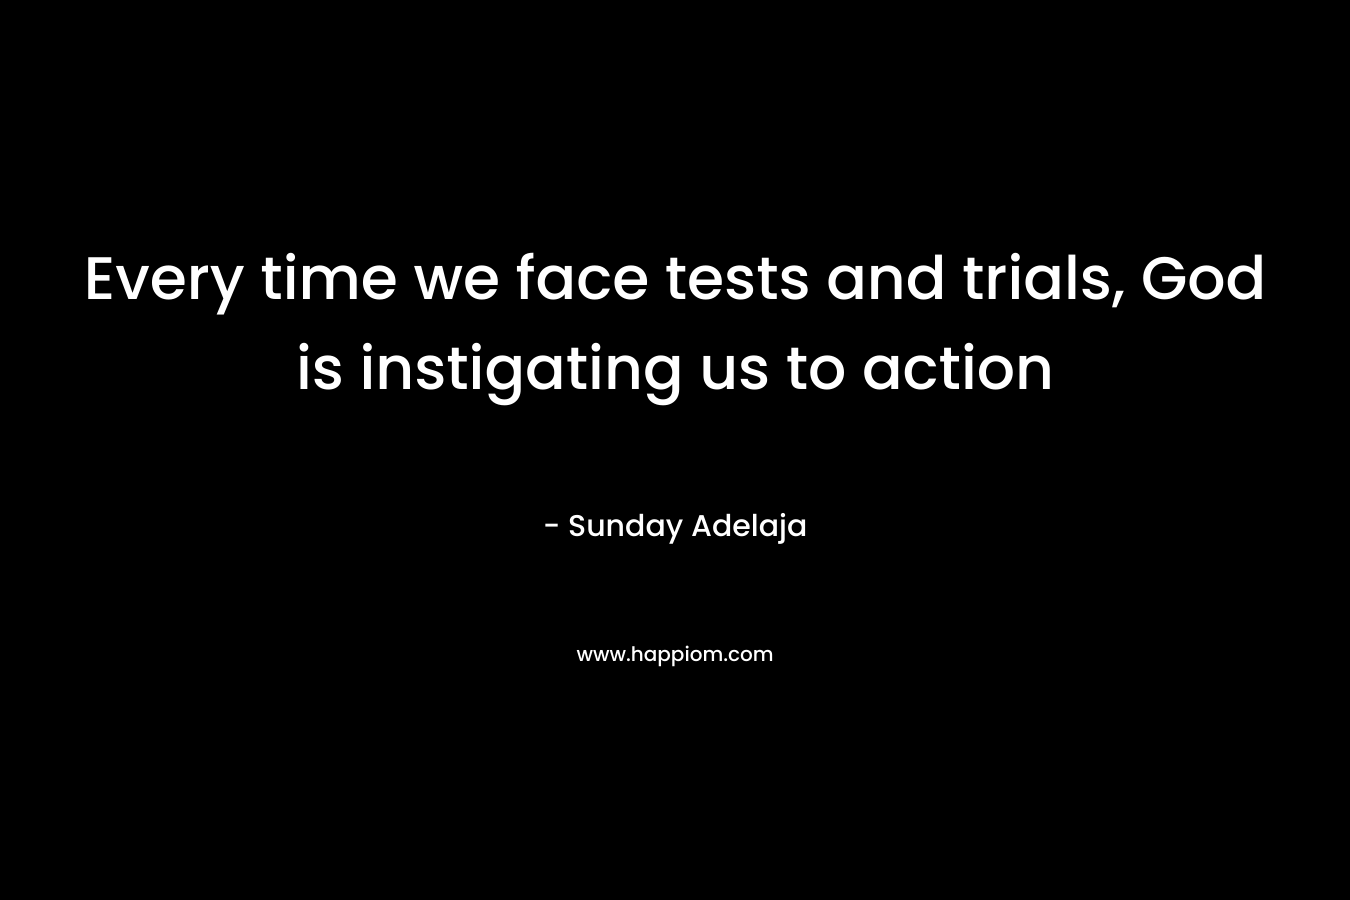 Every time we face tests and trials, God is instigating us to action